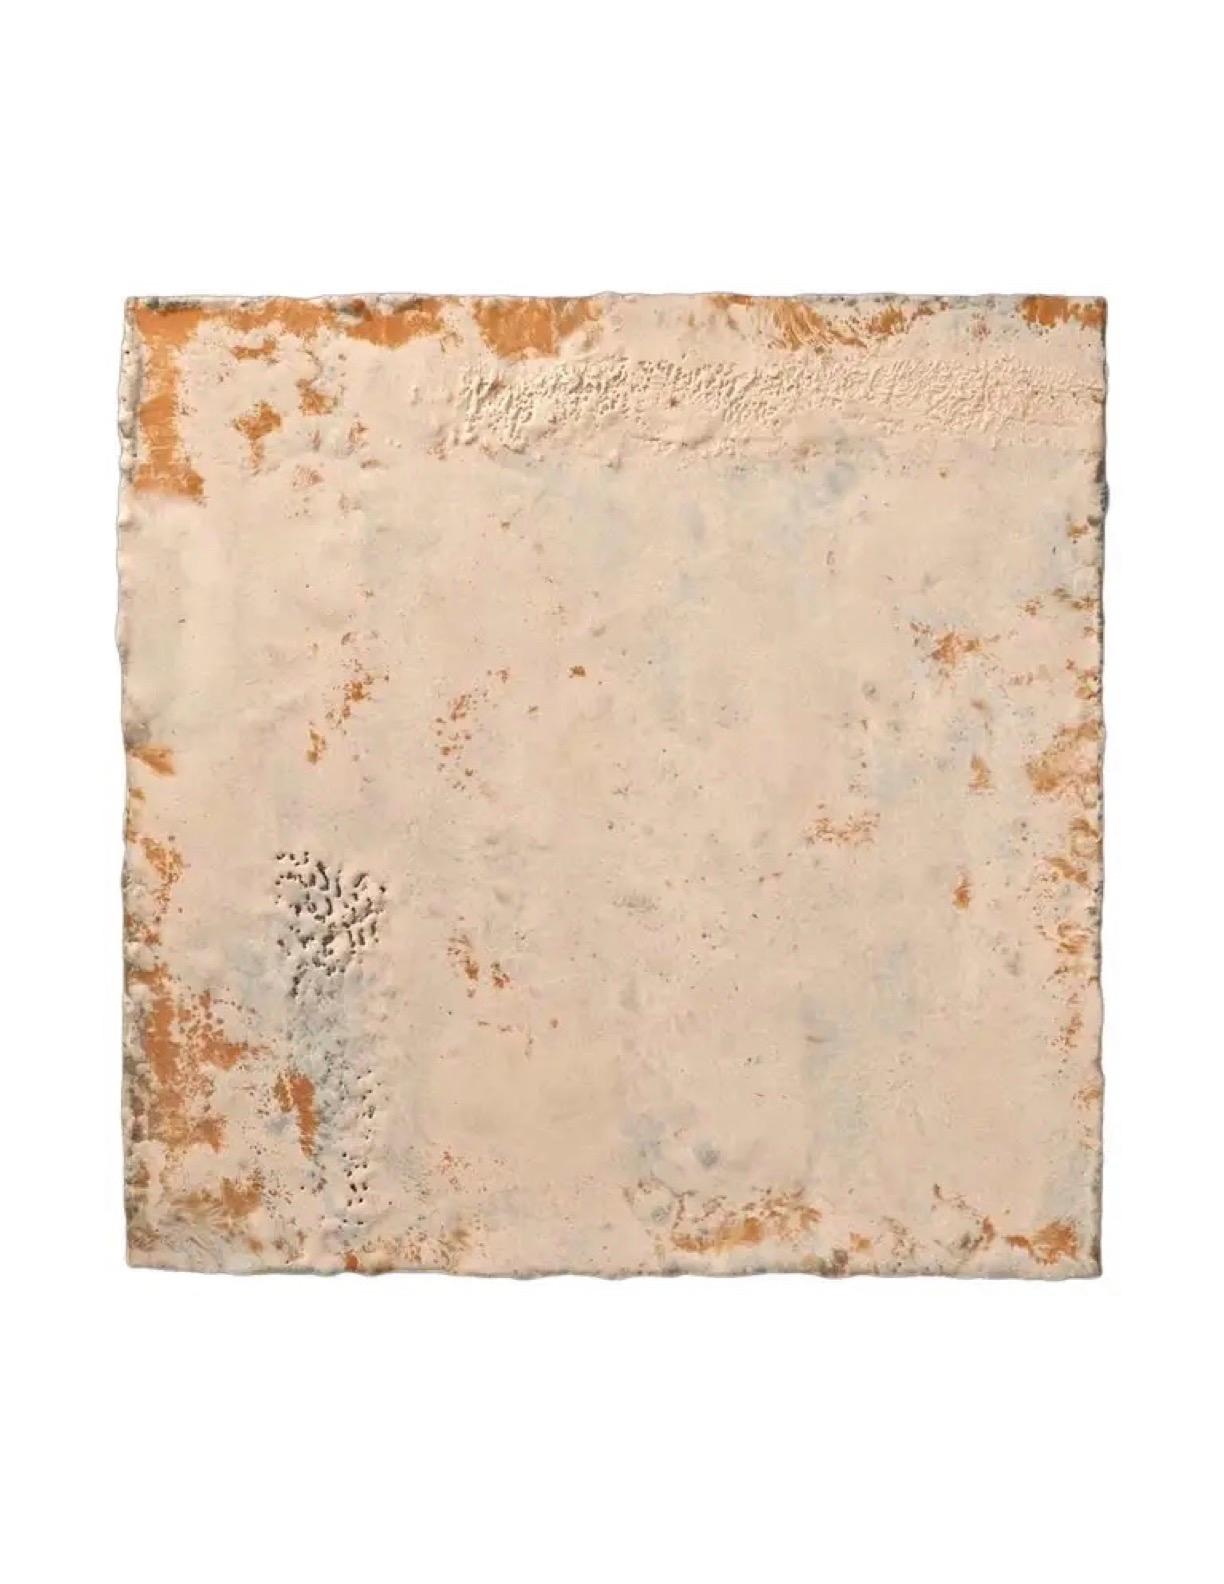 Modern Richard Hirsch Encaustic Painting of Nothing #19, 2011 For Sale